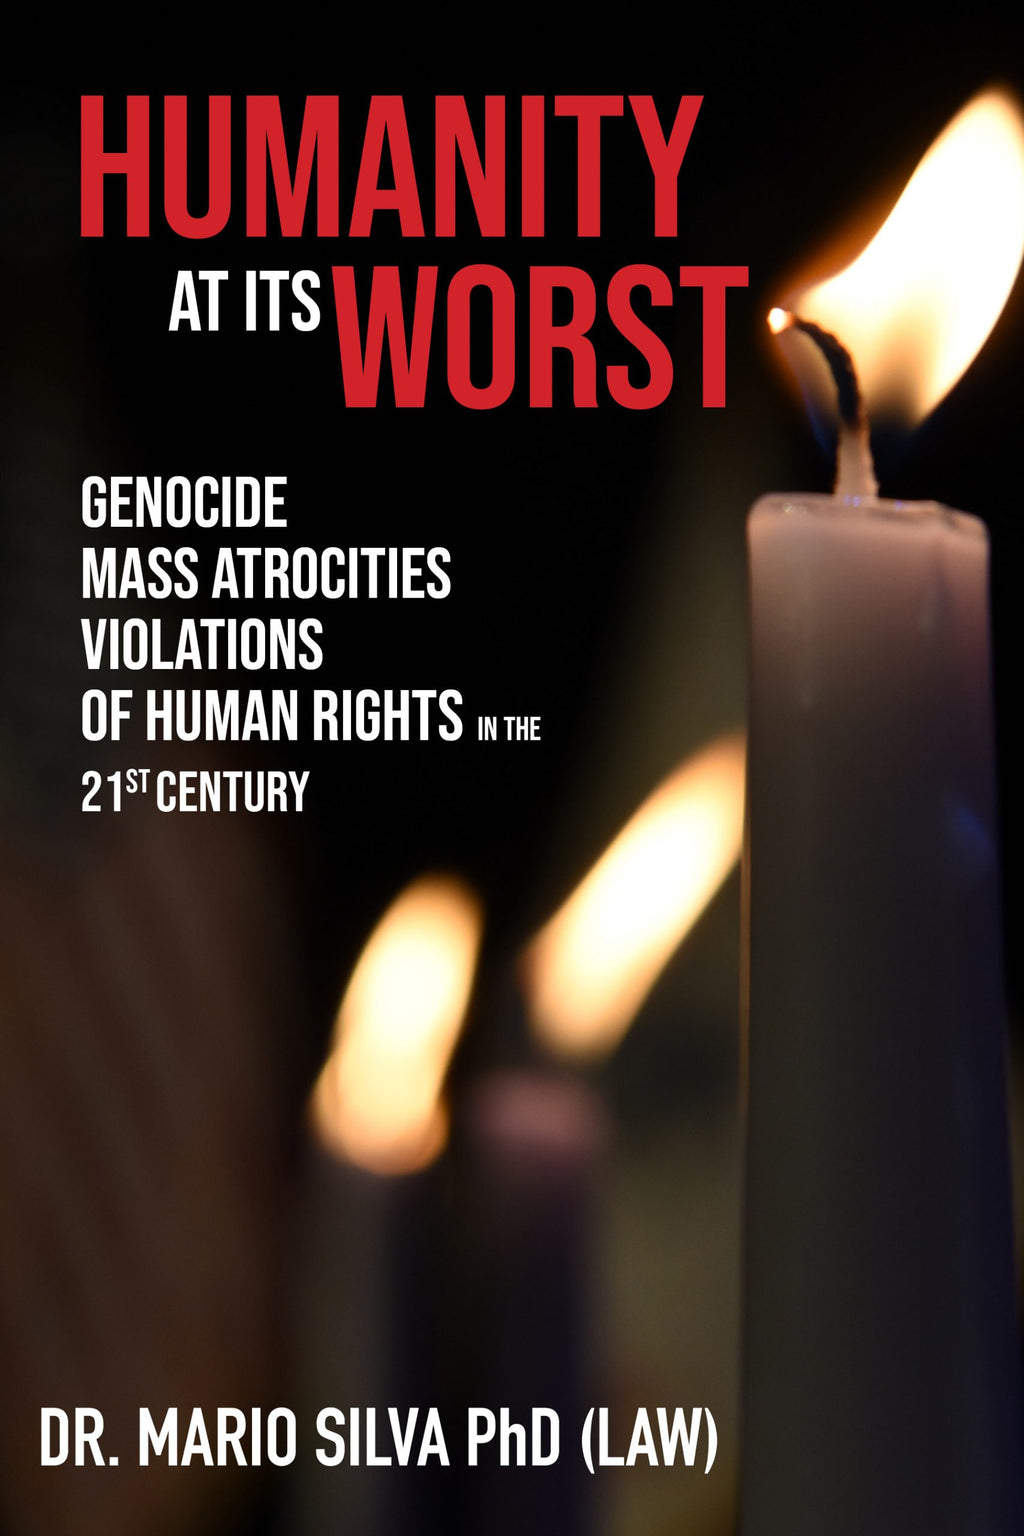 Humanity at its Worst: Genocide, Mass Atrocities, and Violations of Human Rights in the 21st Century